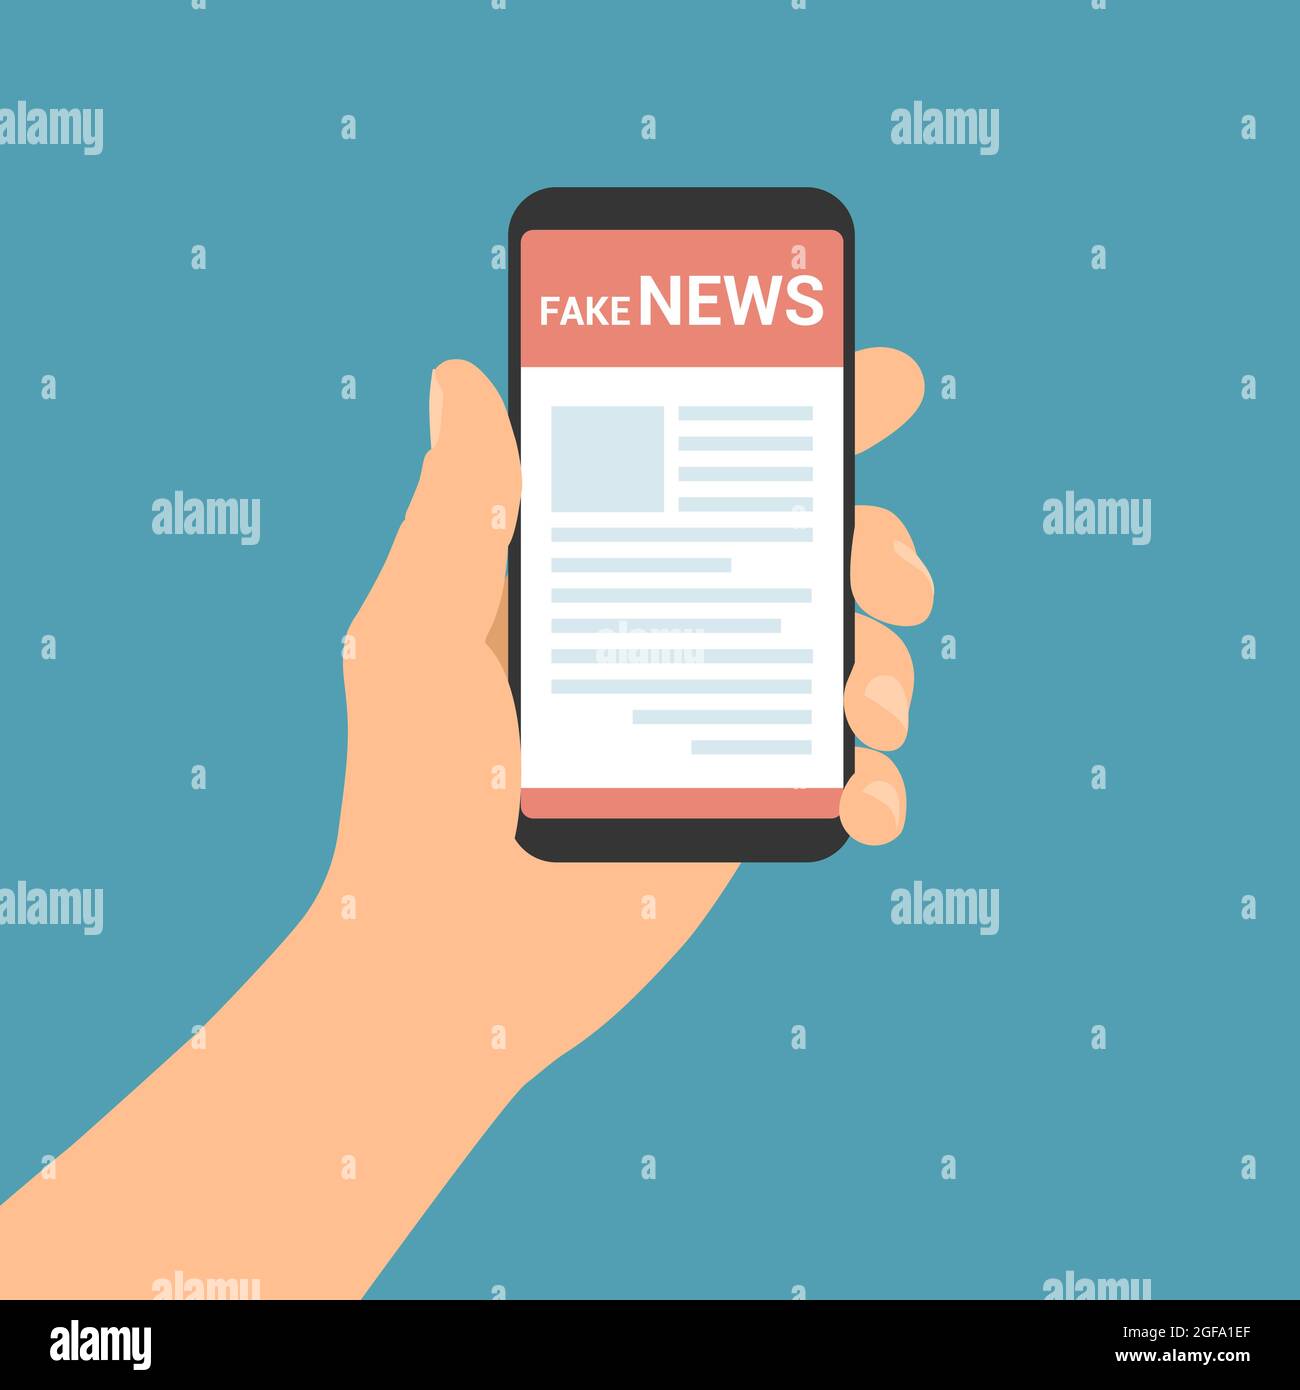 Flat design illustration of male hand holding mobile phone with online newsletter and text fake news - vector Stock Vector